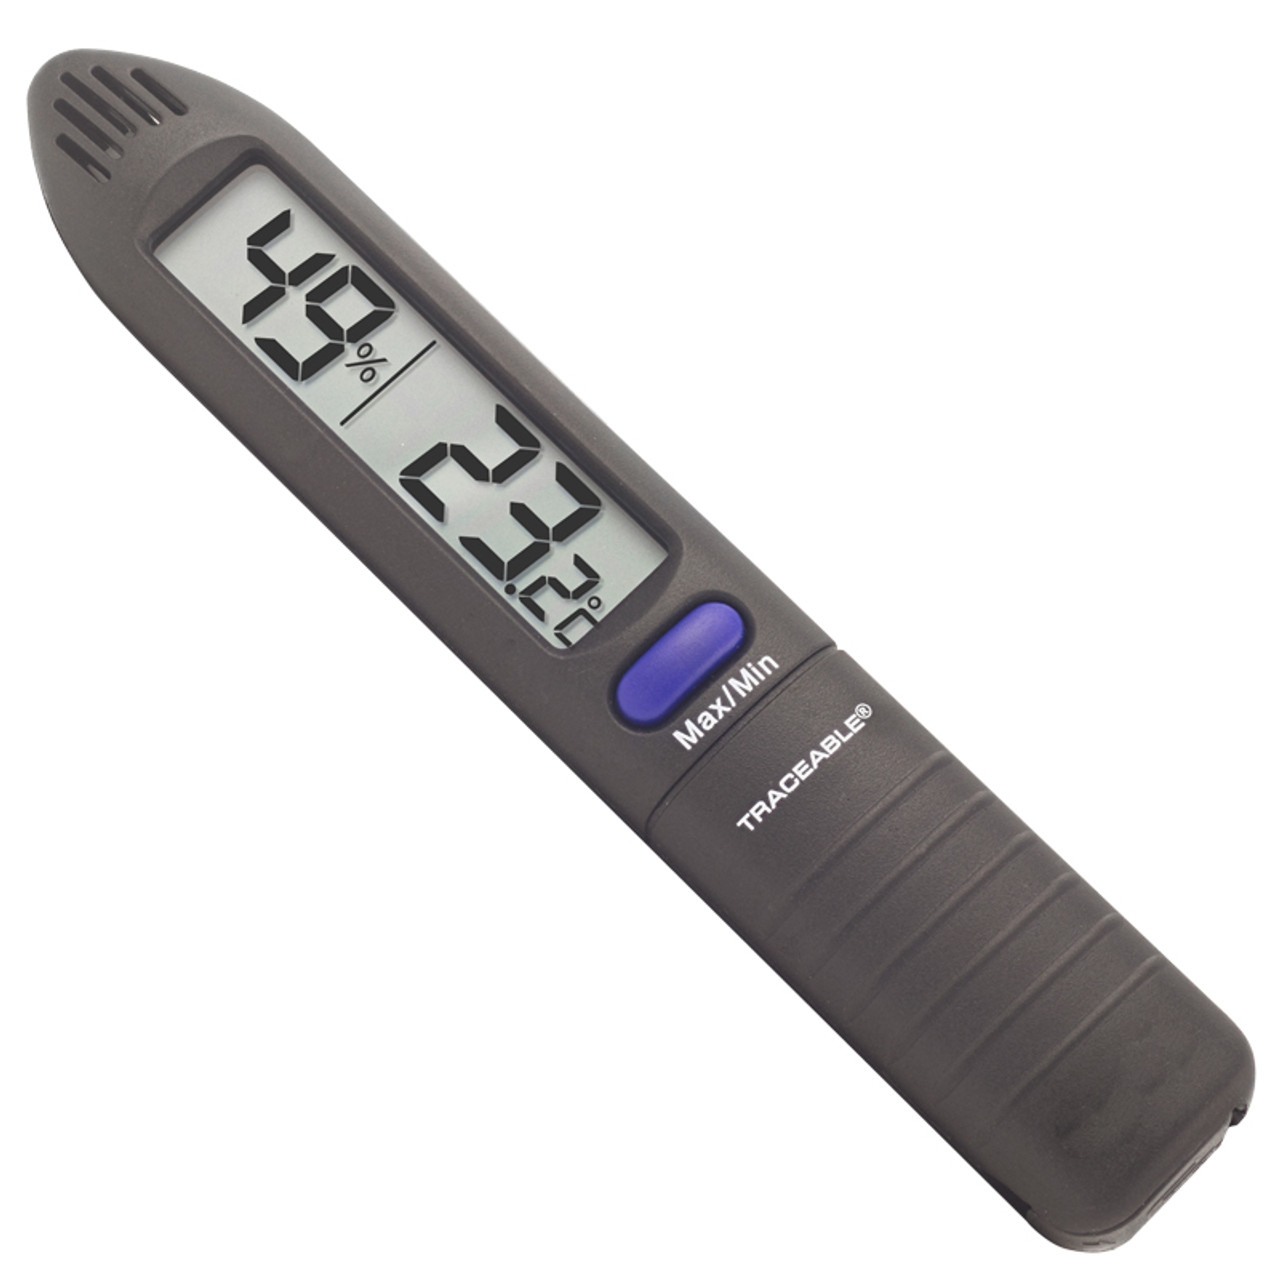 Fisherbrand Traceable Thermometer/Clock/Humidity Monitor Thermometer-clock-humidity